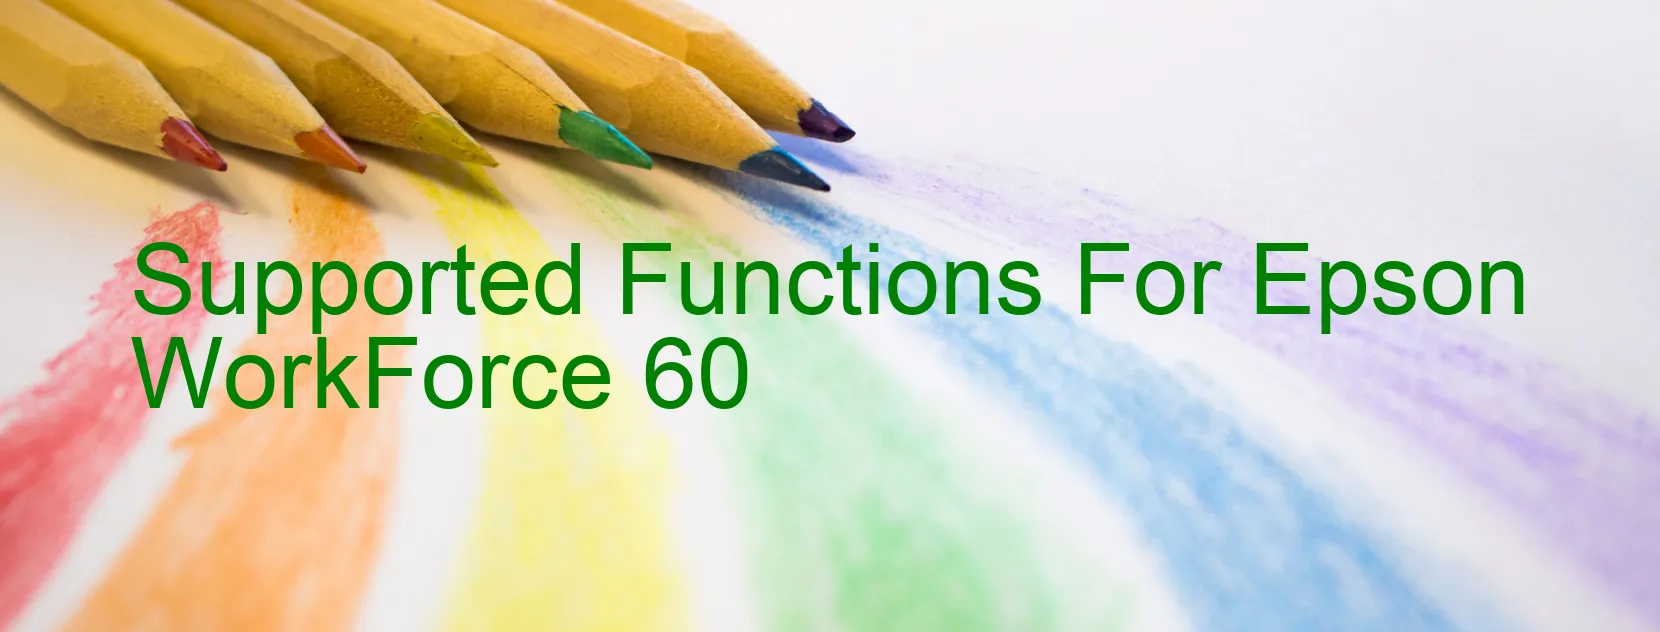 supported-functions-for-epson-workforce-60.webp